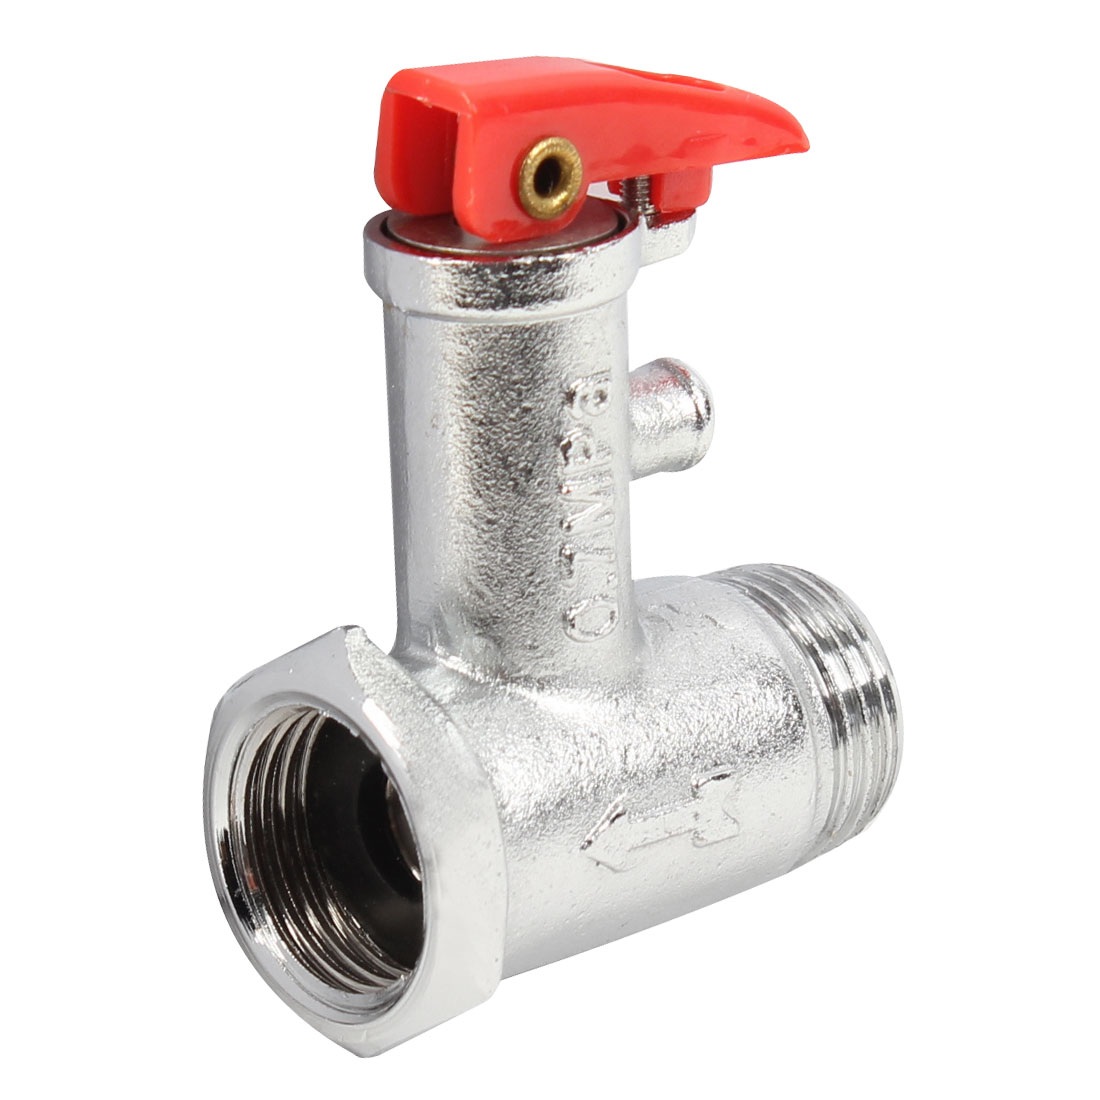 Unique Bargains Electric Water Heater 1/2" Male Thread Check  Relief Valve - image 1 of 1